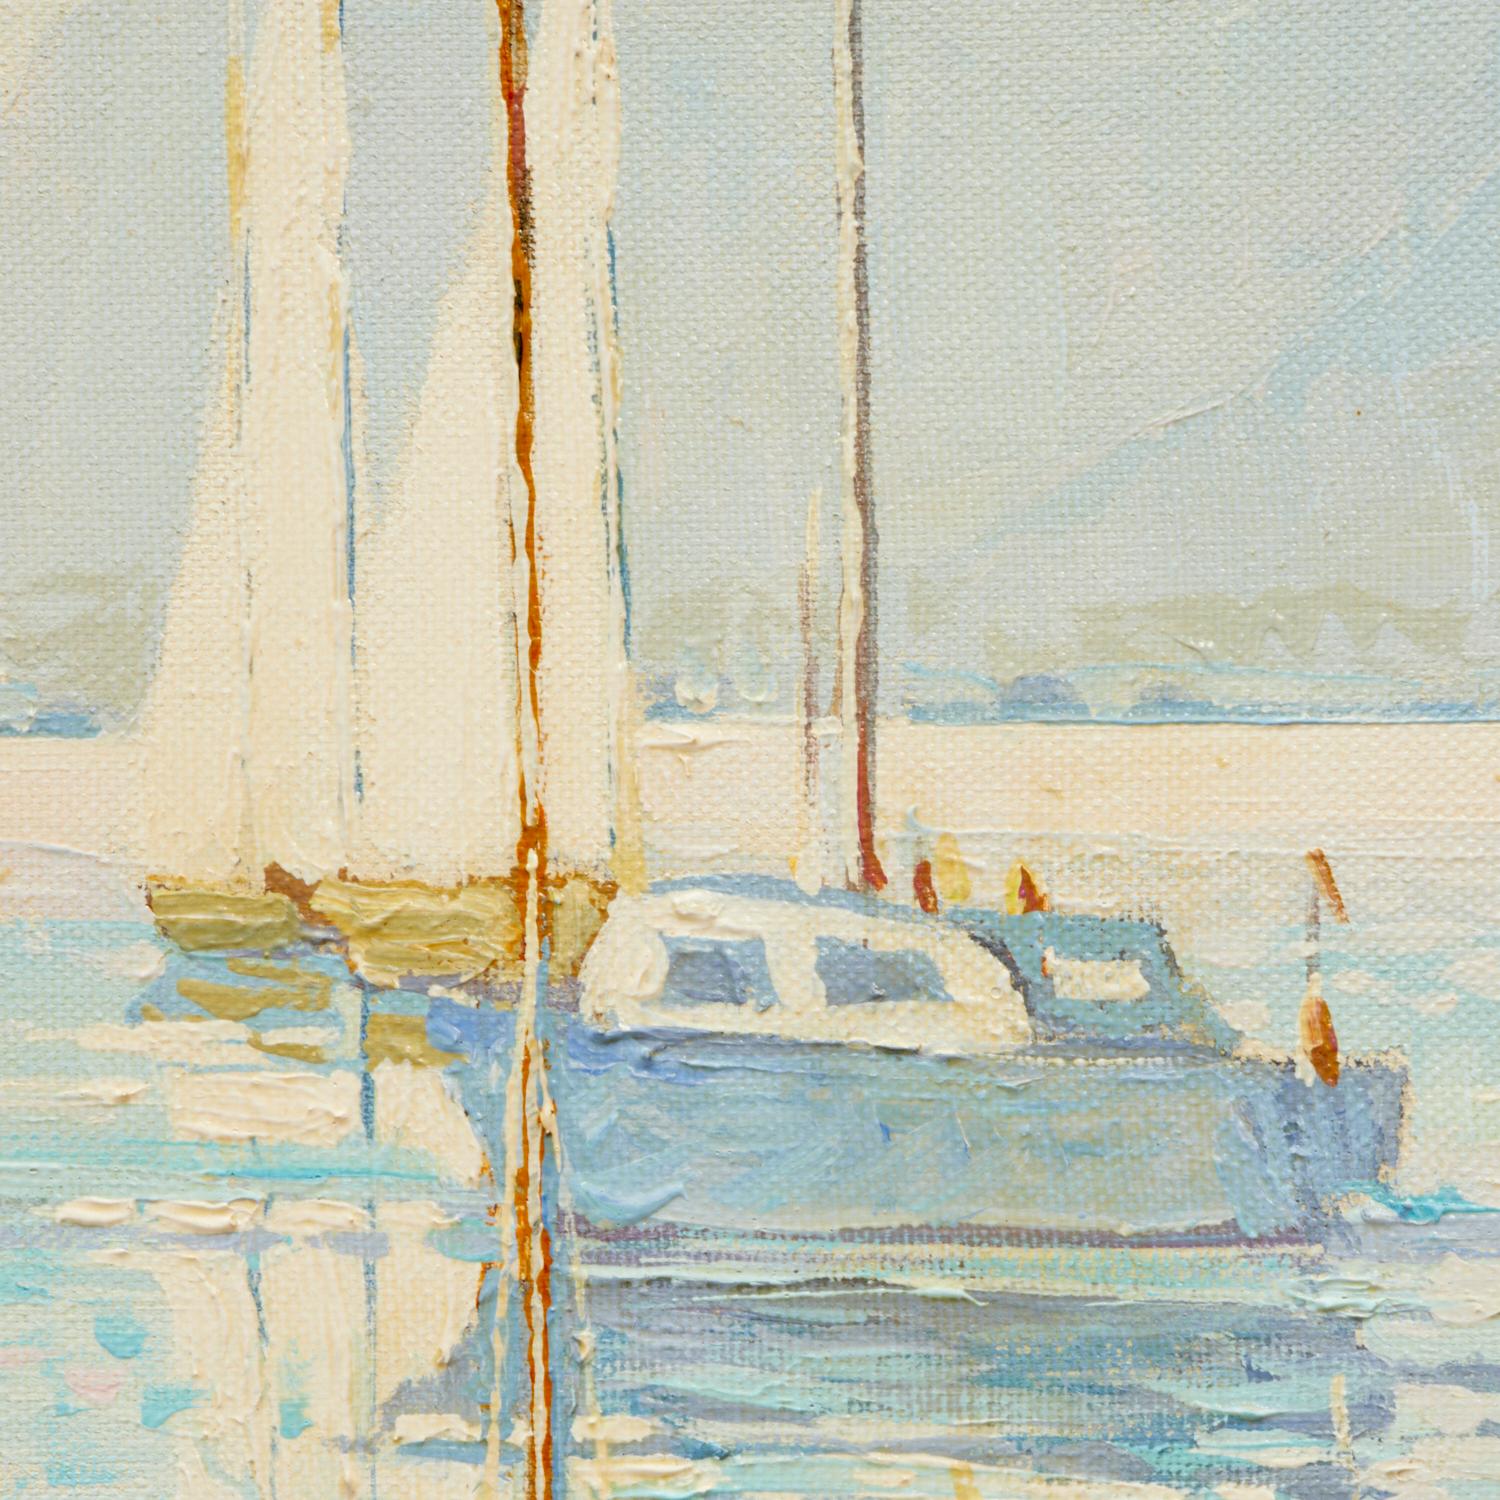 20th C. Docked Sailboats Impressionist Painting, Oil on Canvas, Anatoly Shlapak In Good Condition For Sale In Morristown, NJ